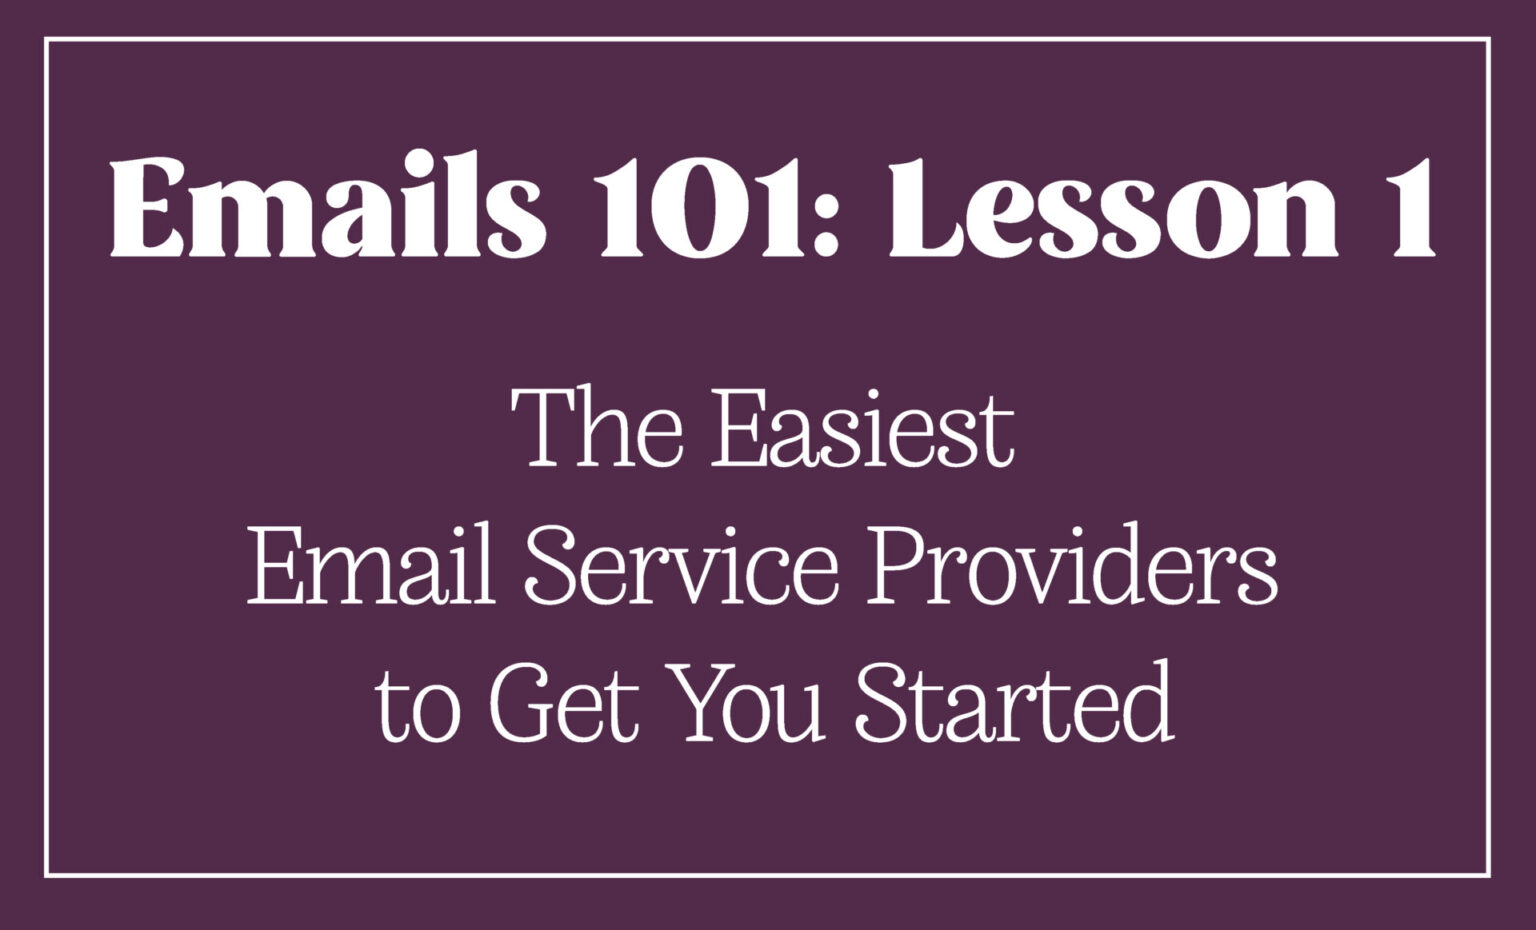 Easiest Email Service Providers